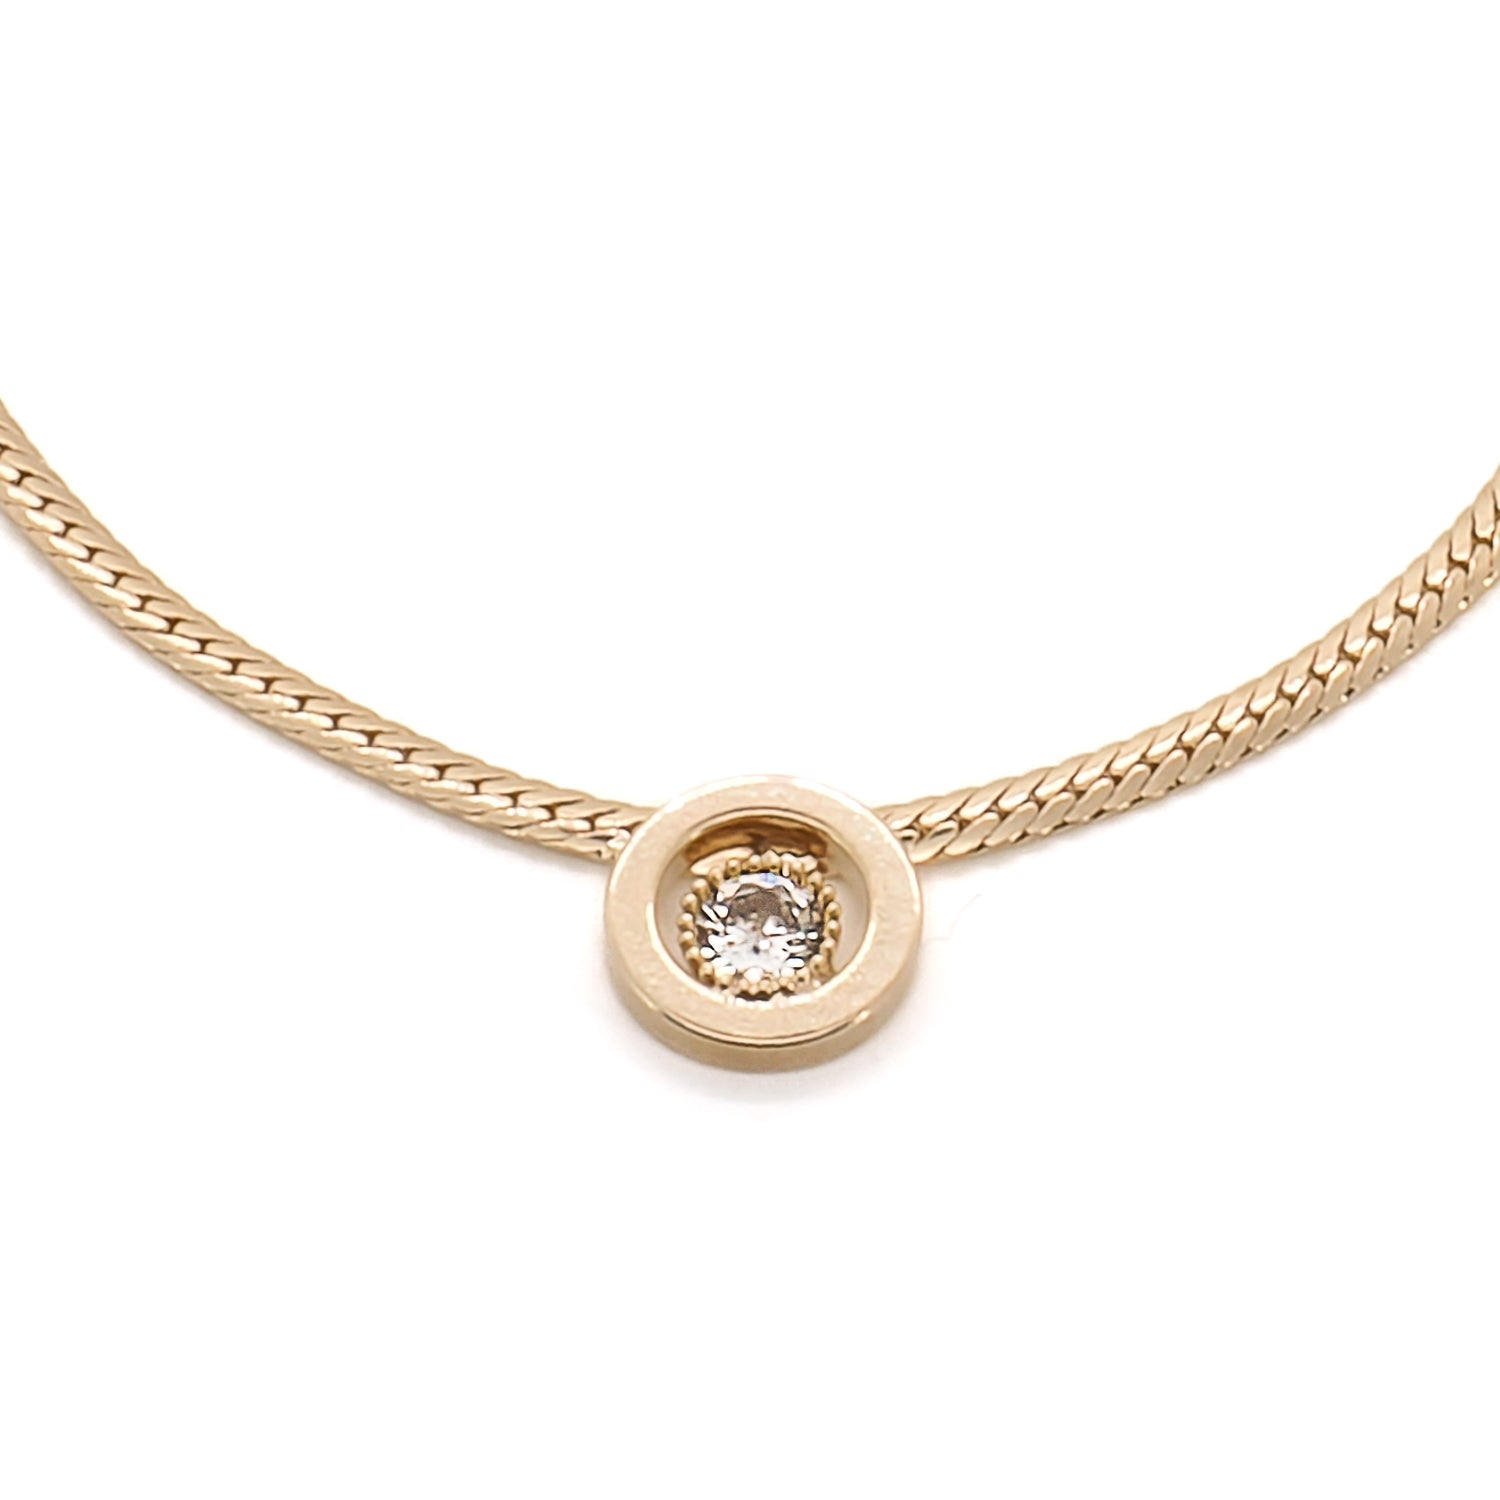 Detailed shot of the choker necklace, highlighting the intricate 14K gold plating and its exquisite craftsmanship.